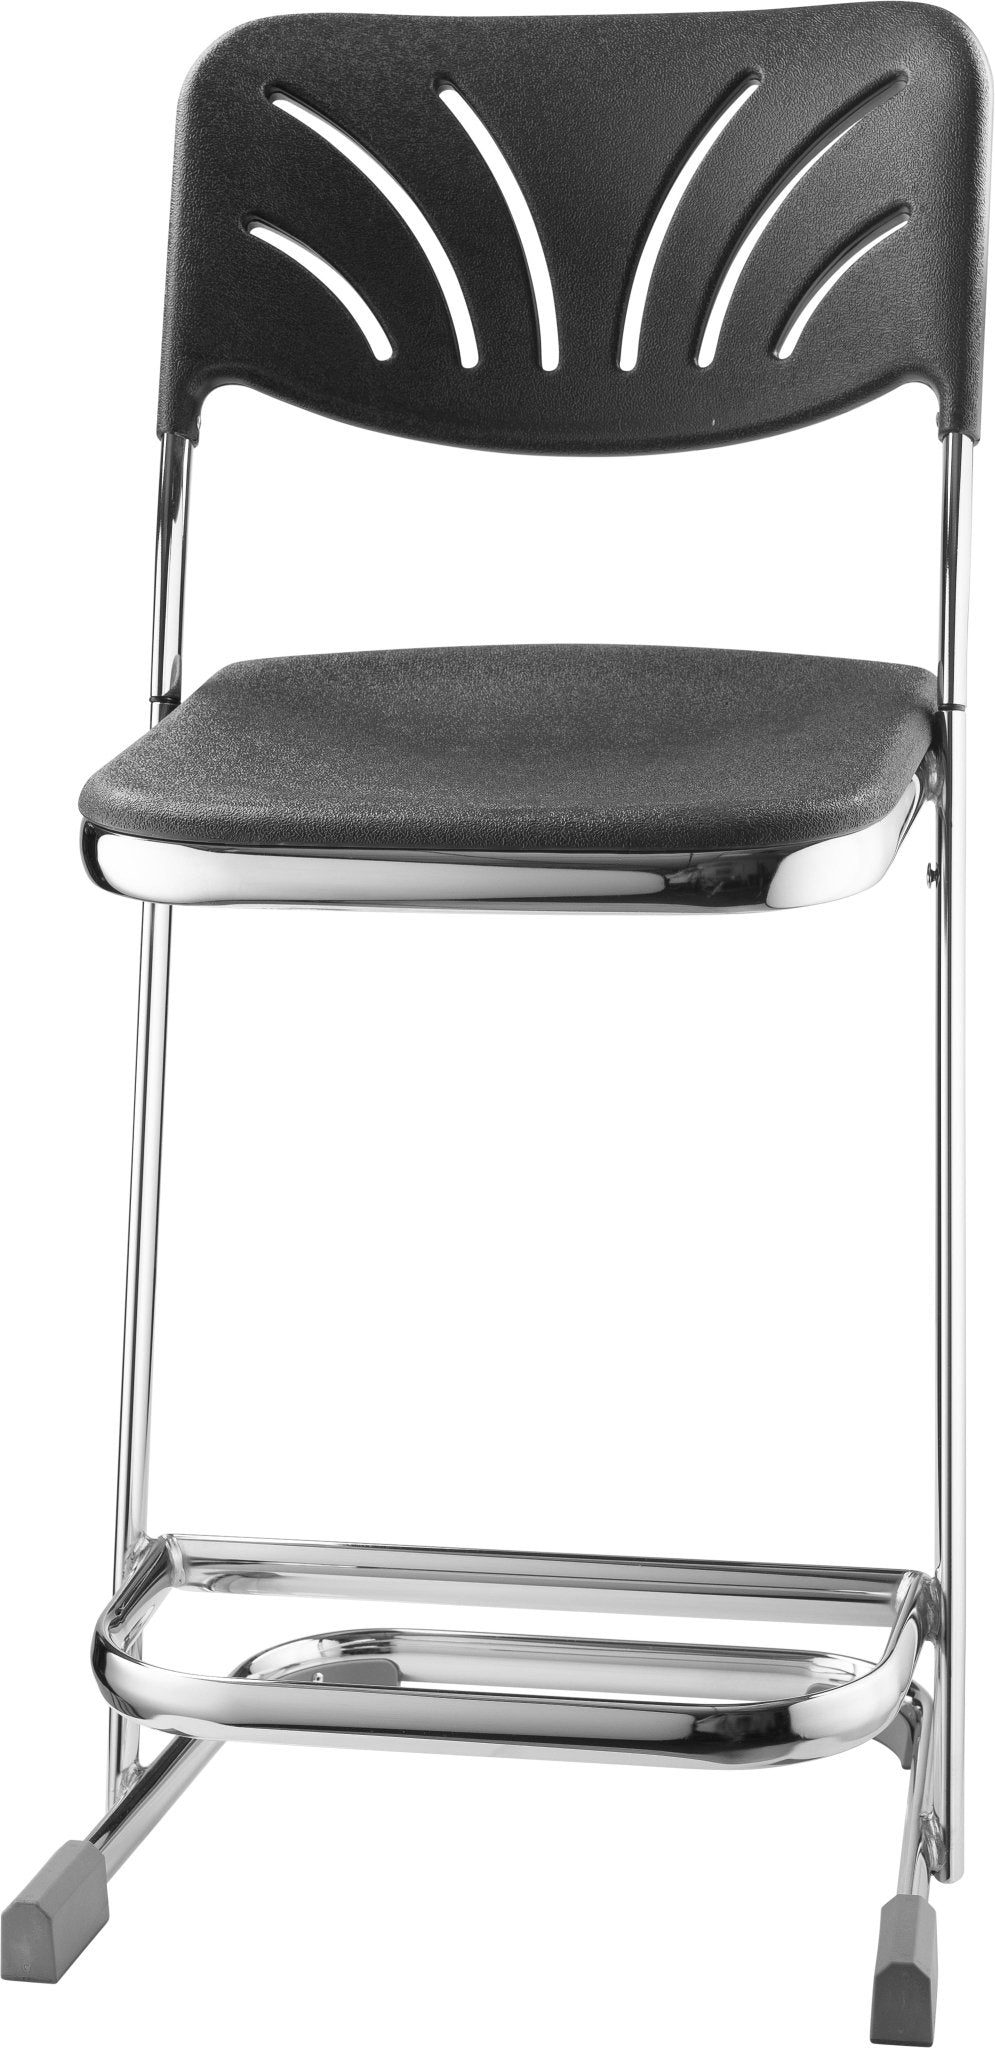 NPS Elephant Z-stool 22" H Stool with Blow Molded Seat and Backrest (National Public Seating NPS-6622B) - SchoolOutlet